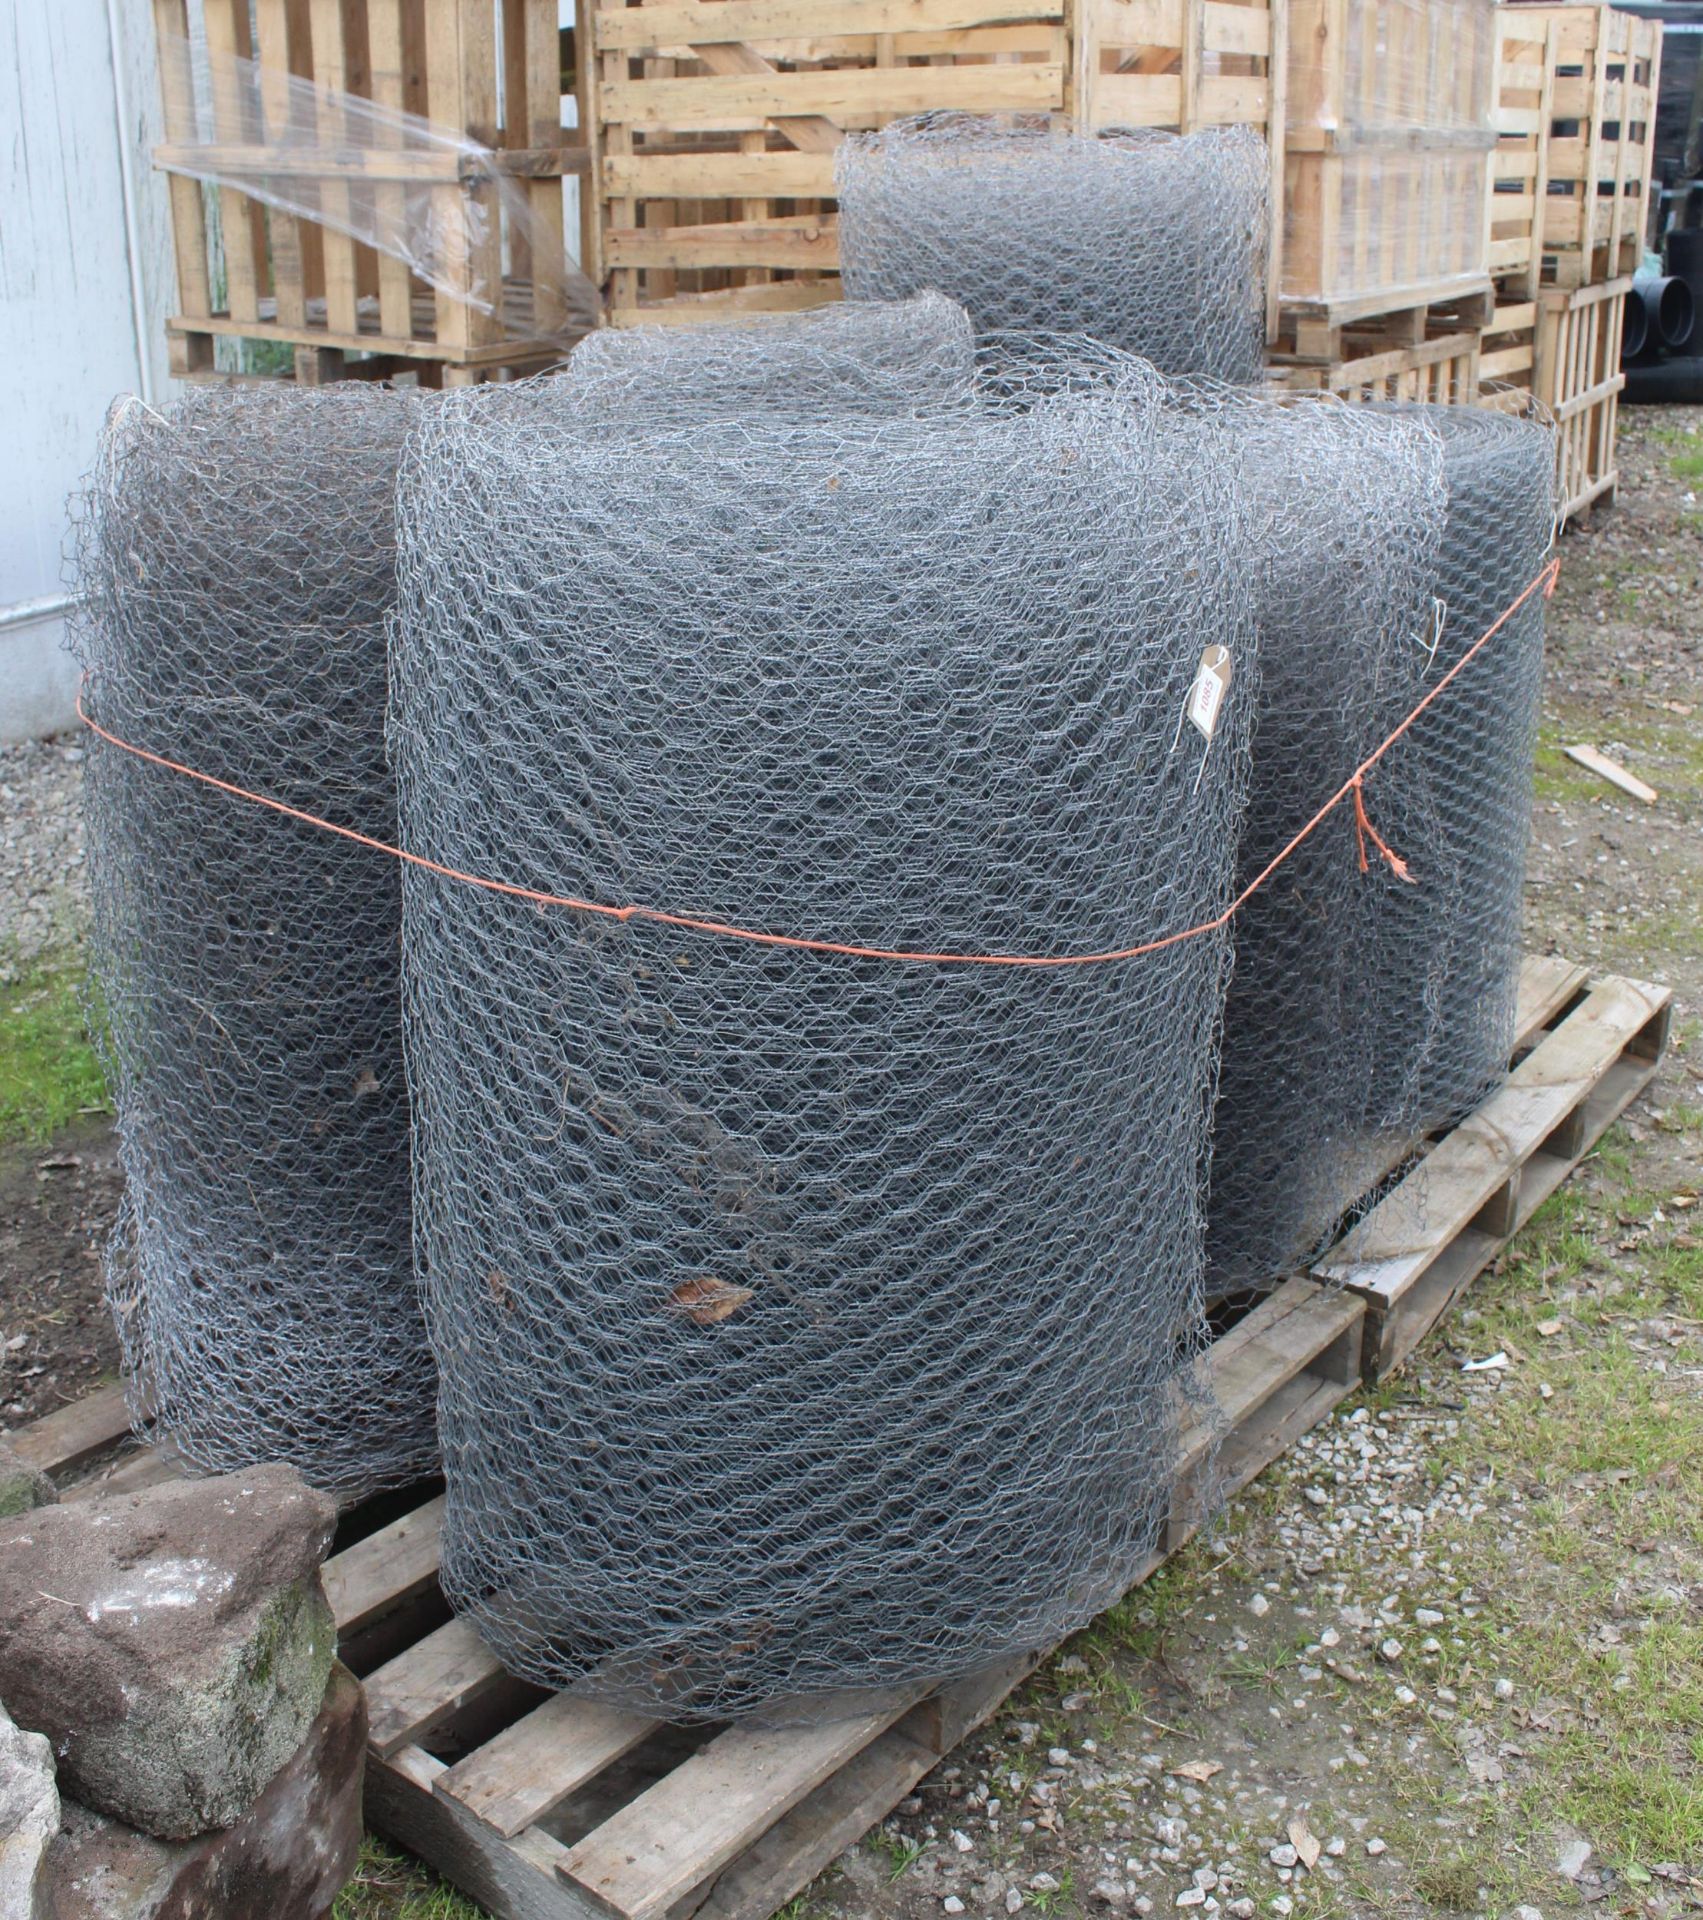 4 ROLLS OF WIRE NETTING 30" HIGH X 4" MESH AND 1 ROLL 36" HIGH X 4" MESH NO VAT